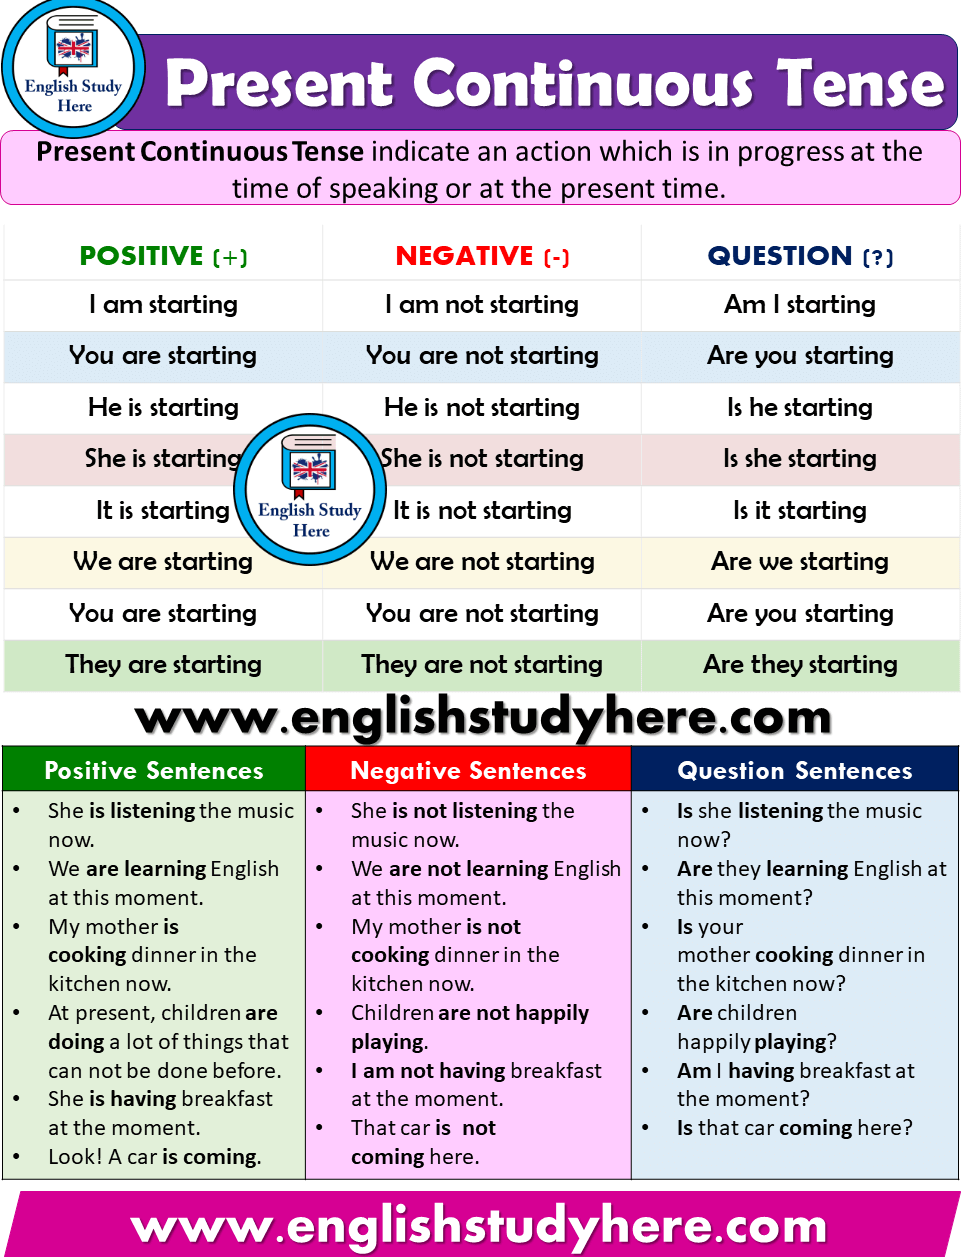 present-continuous-tense-detailed-expression-english-study-here